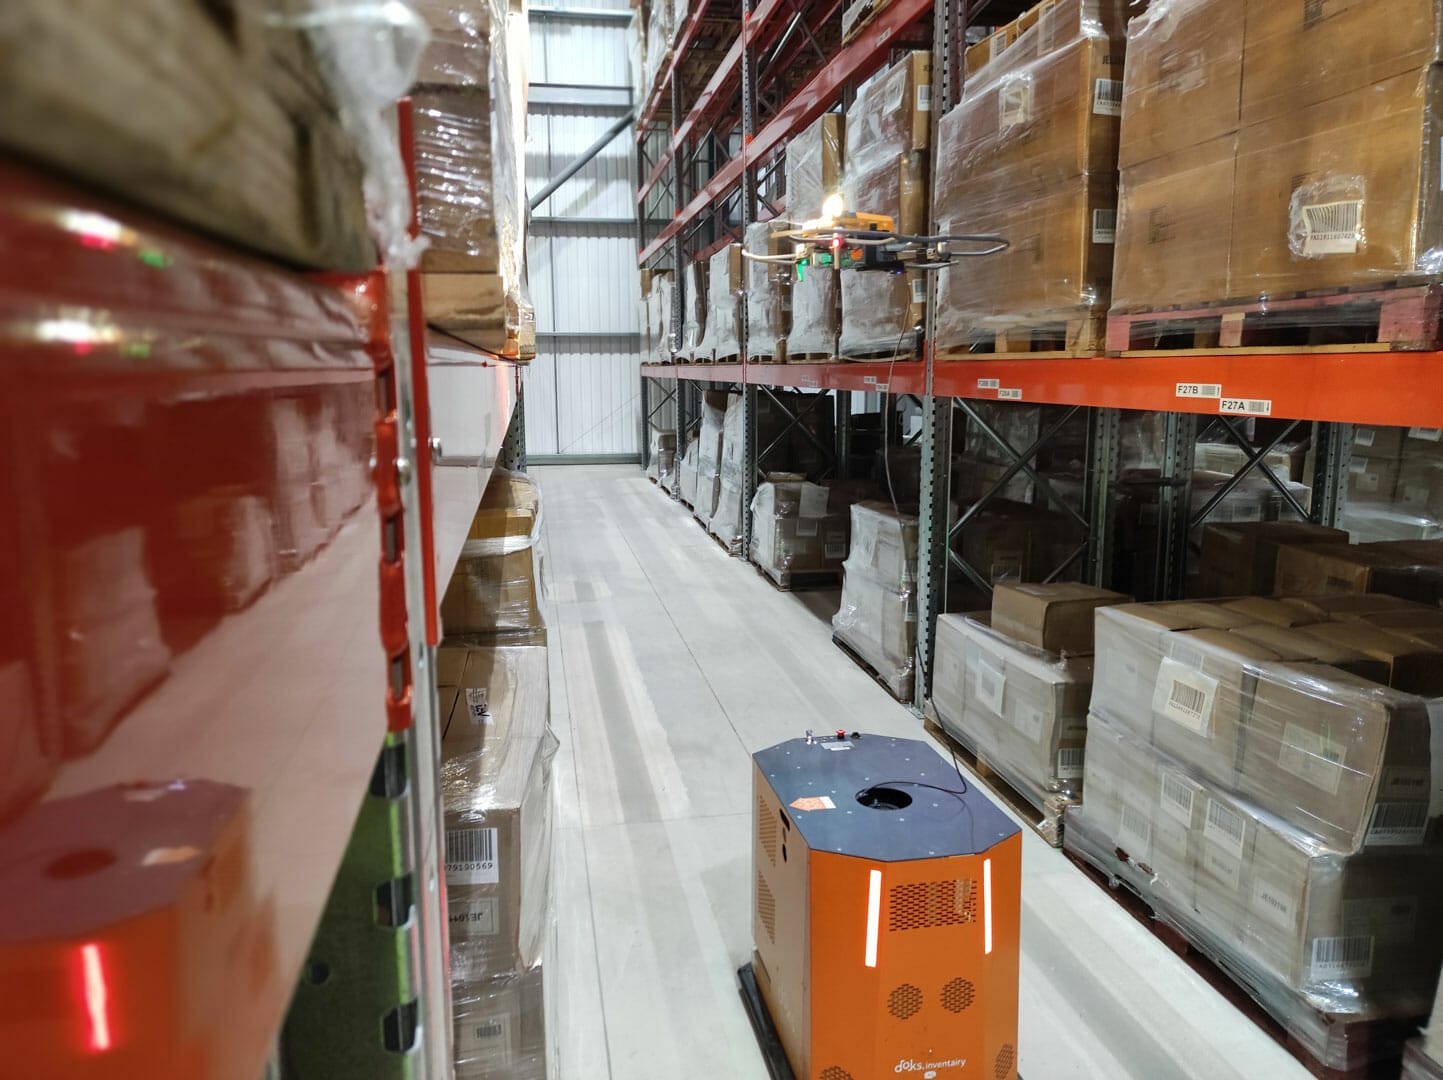 inventAIRy XL autonomous inventory drone solution scanning pallets in a warehouse in Swindon, UK.